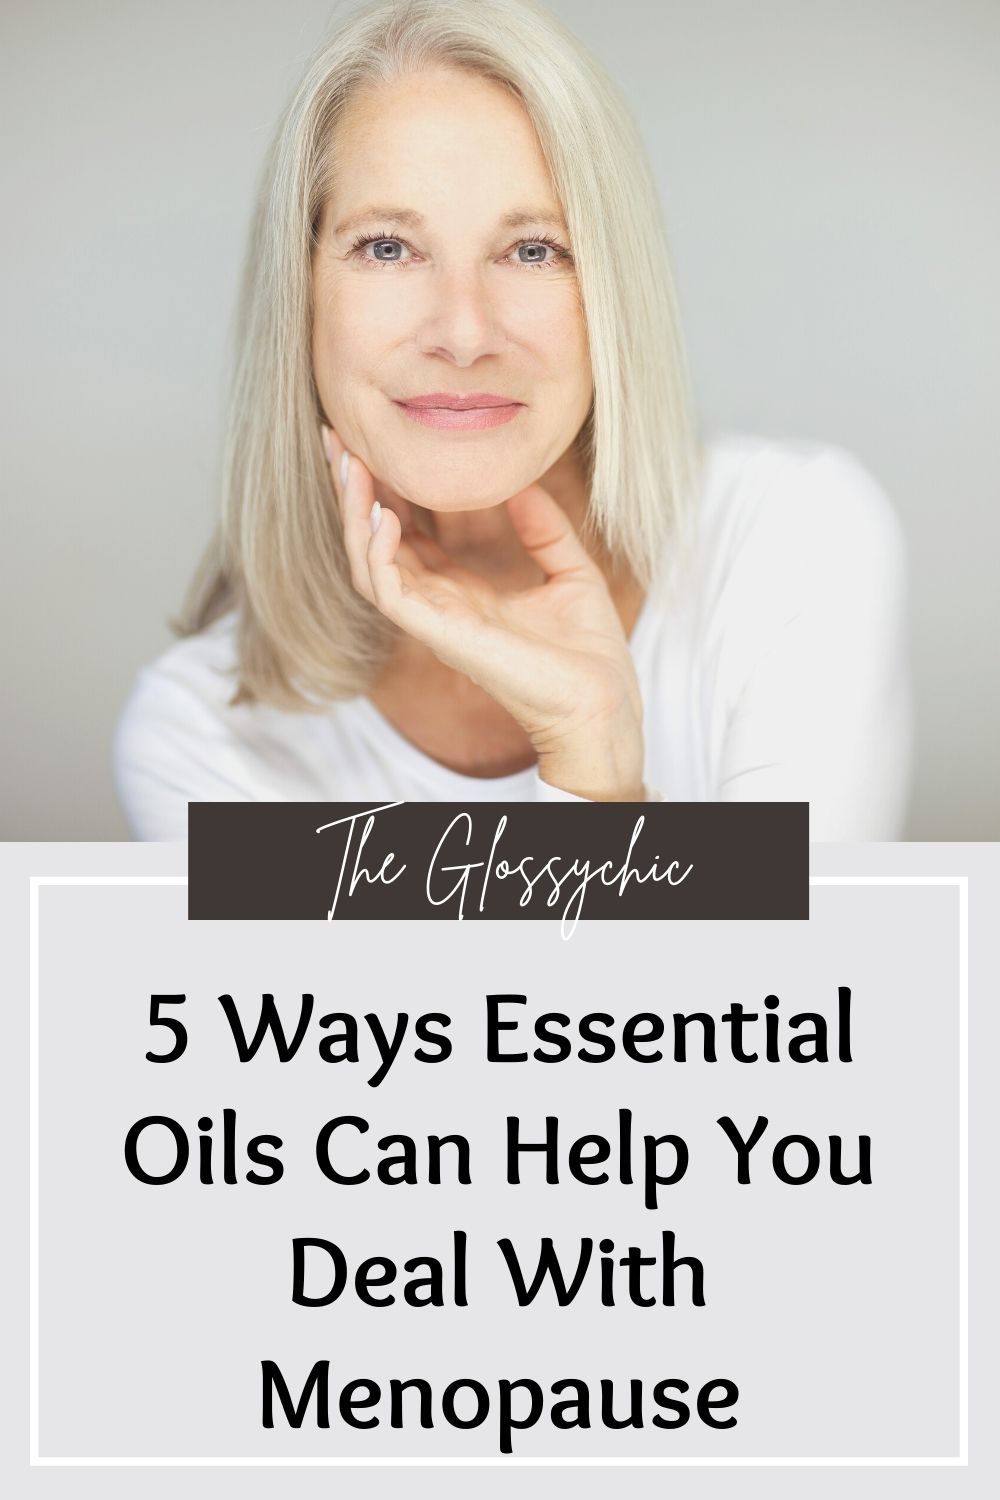 5 Ways Essential Oils Can Help You Deal With Menopause